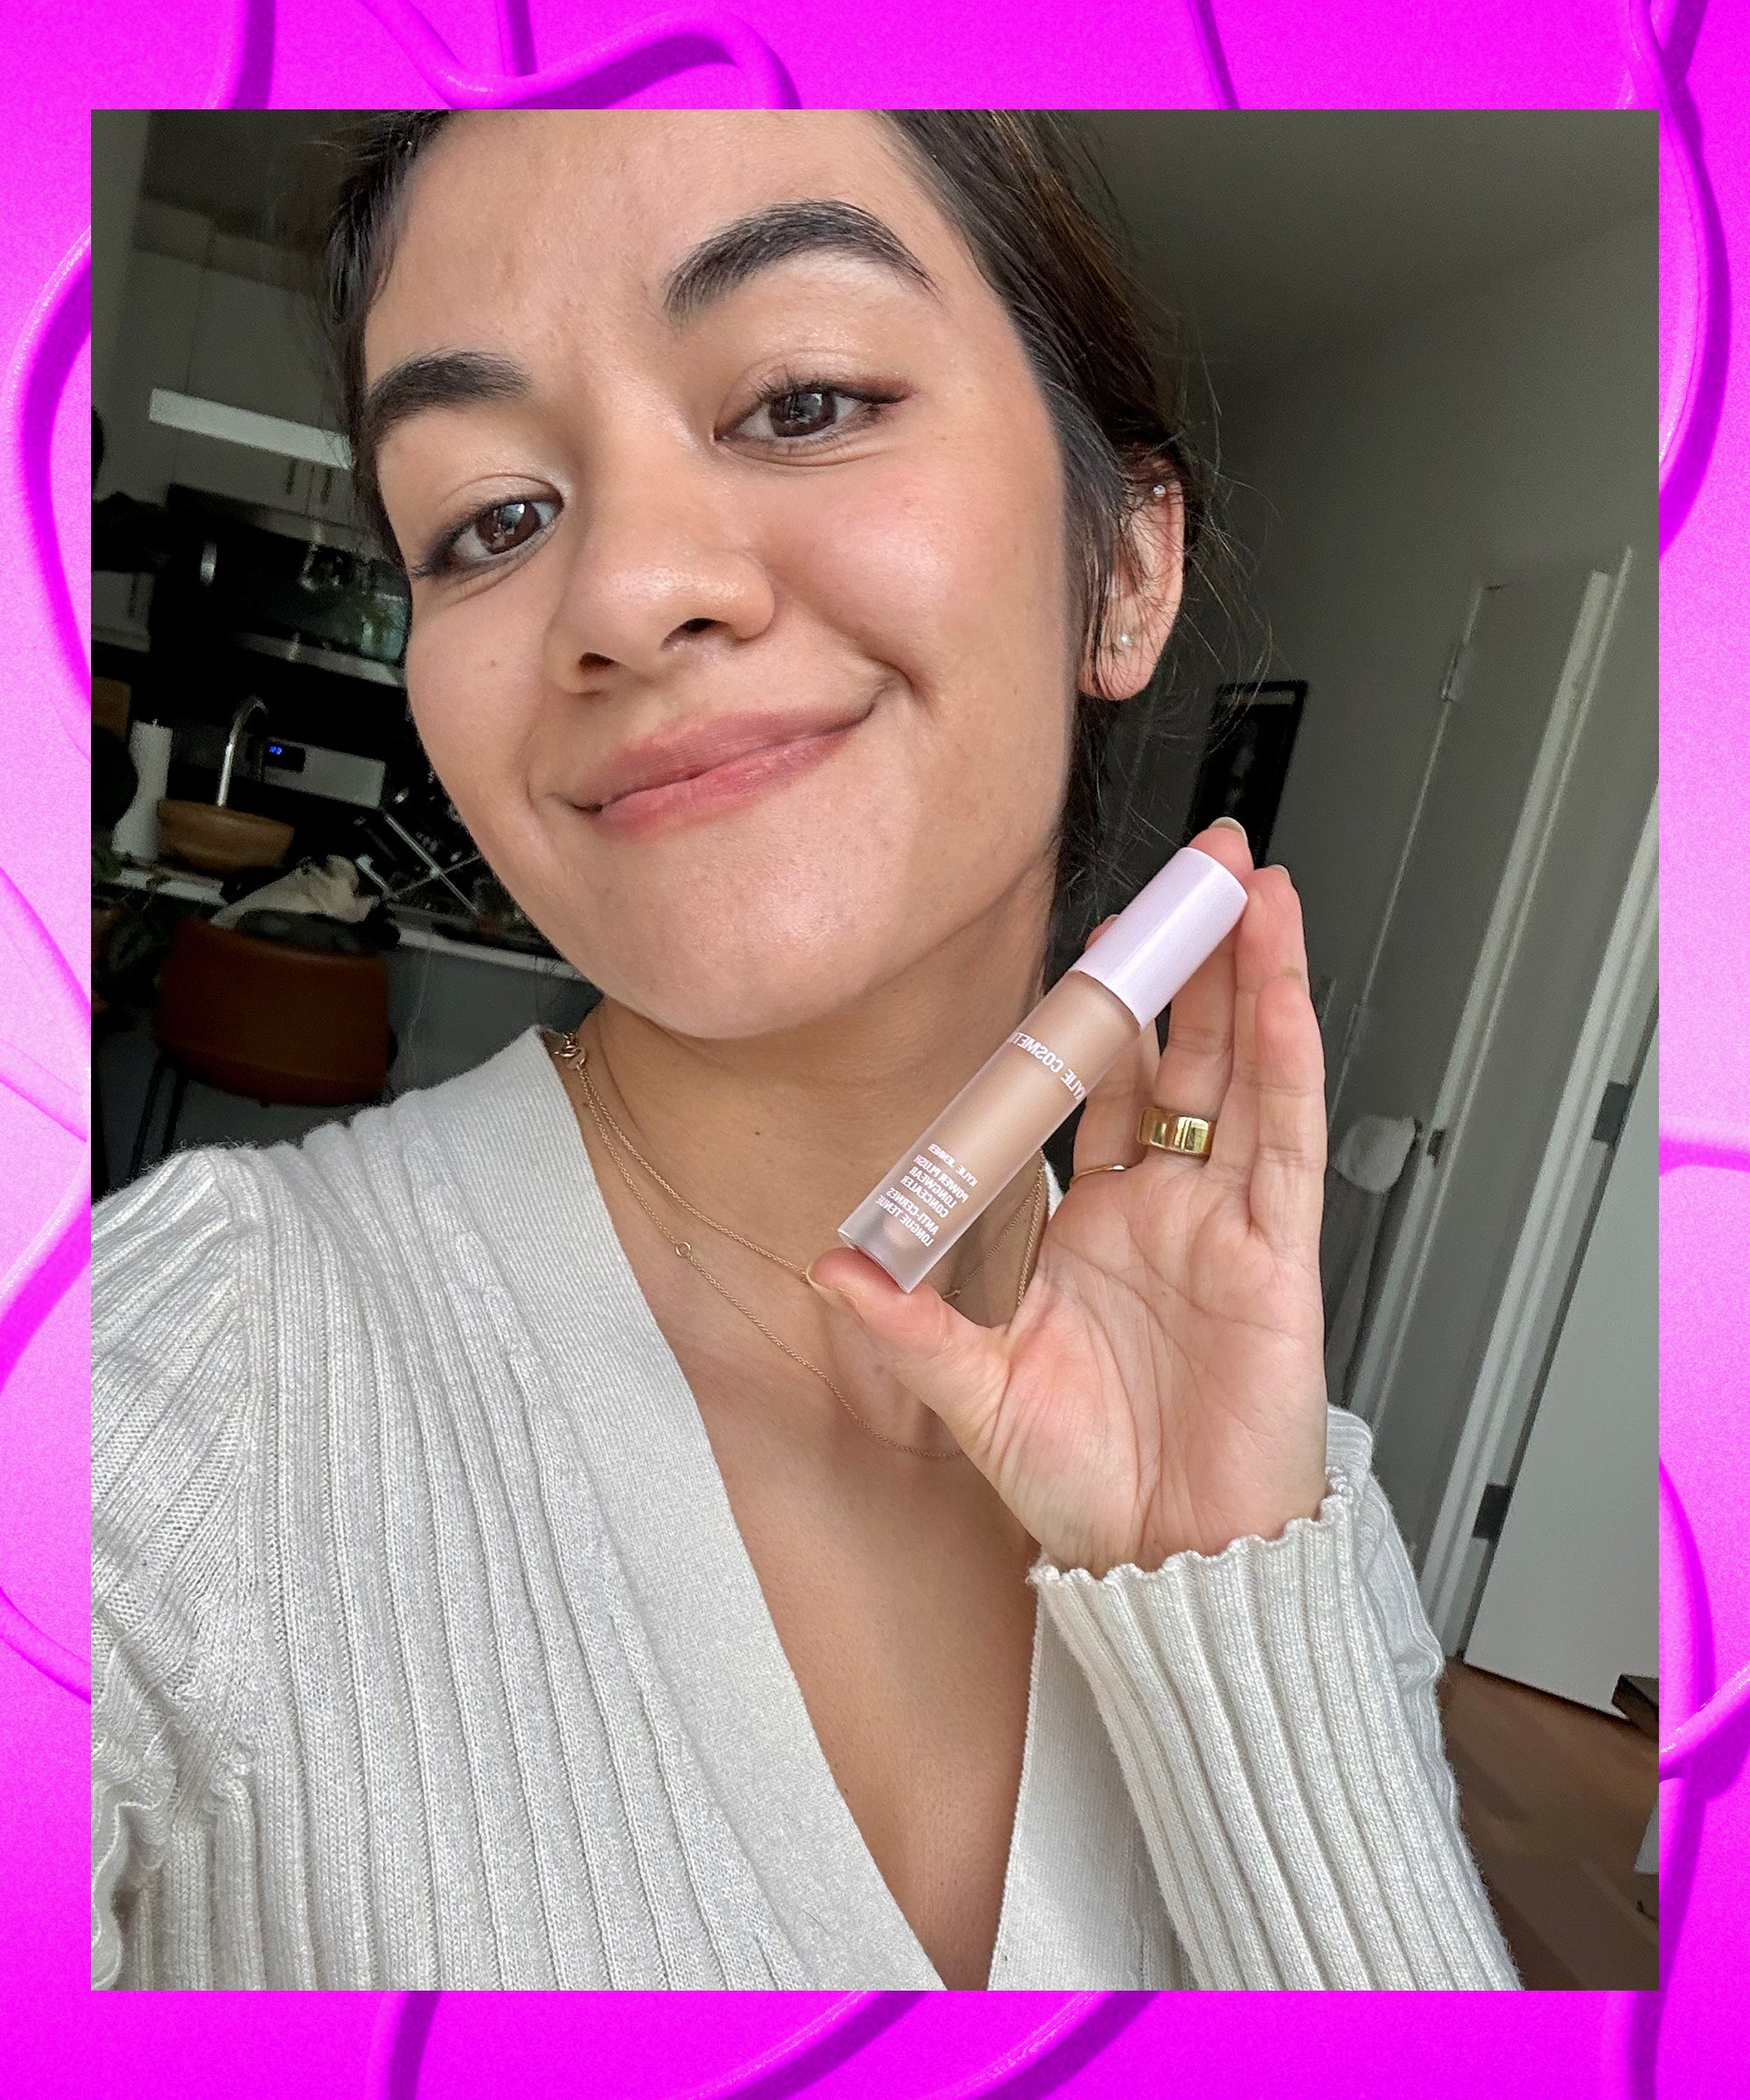 Kylie Jenner Posie K Lip Gloss Review - Kylie Cosmetics Glosses